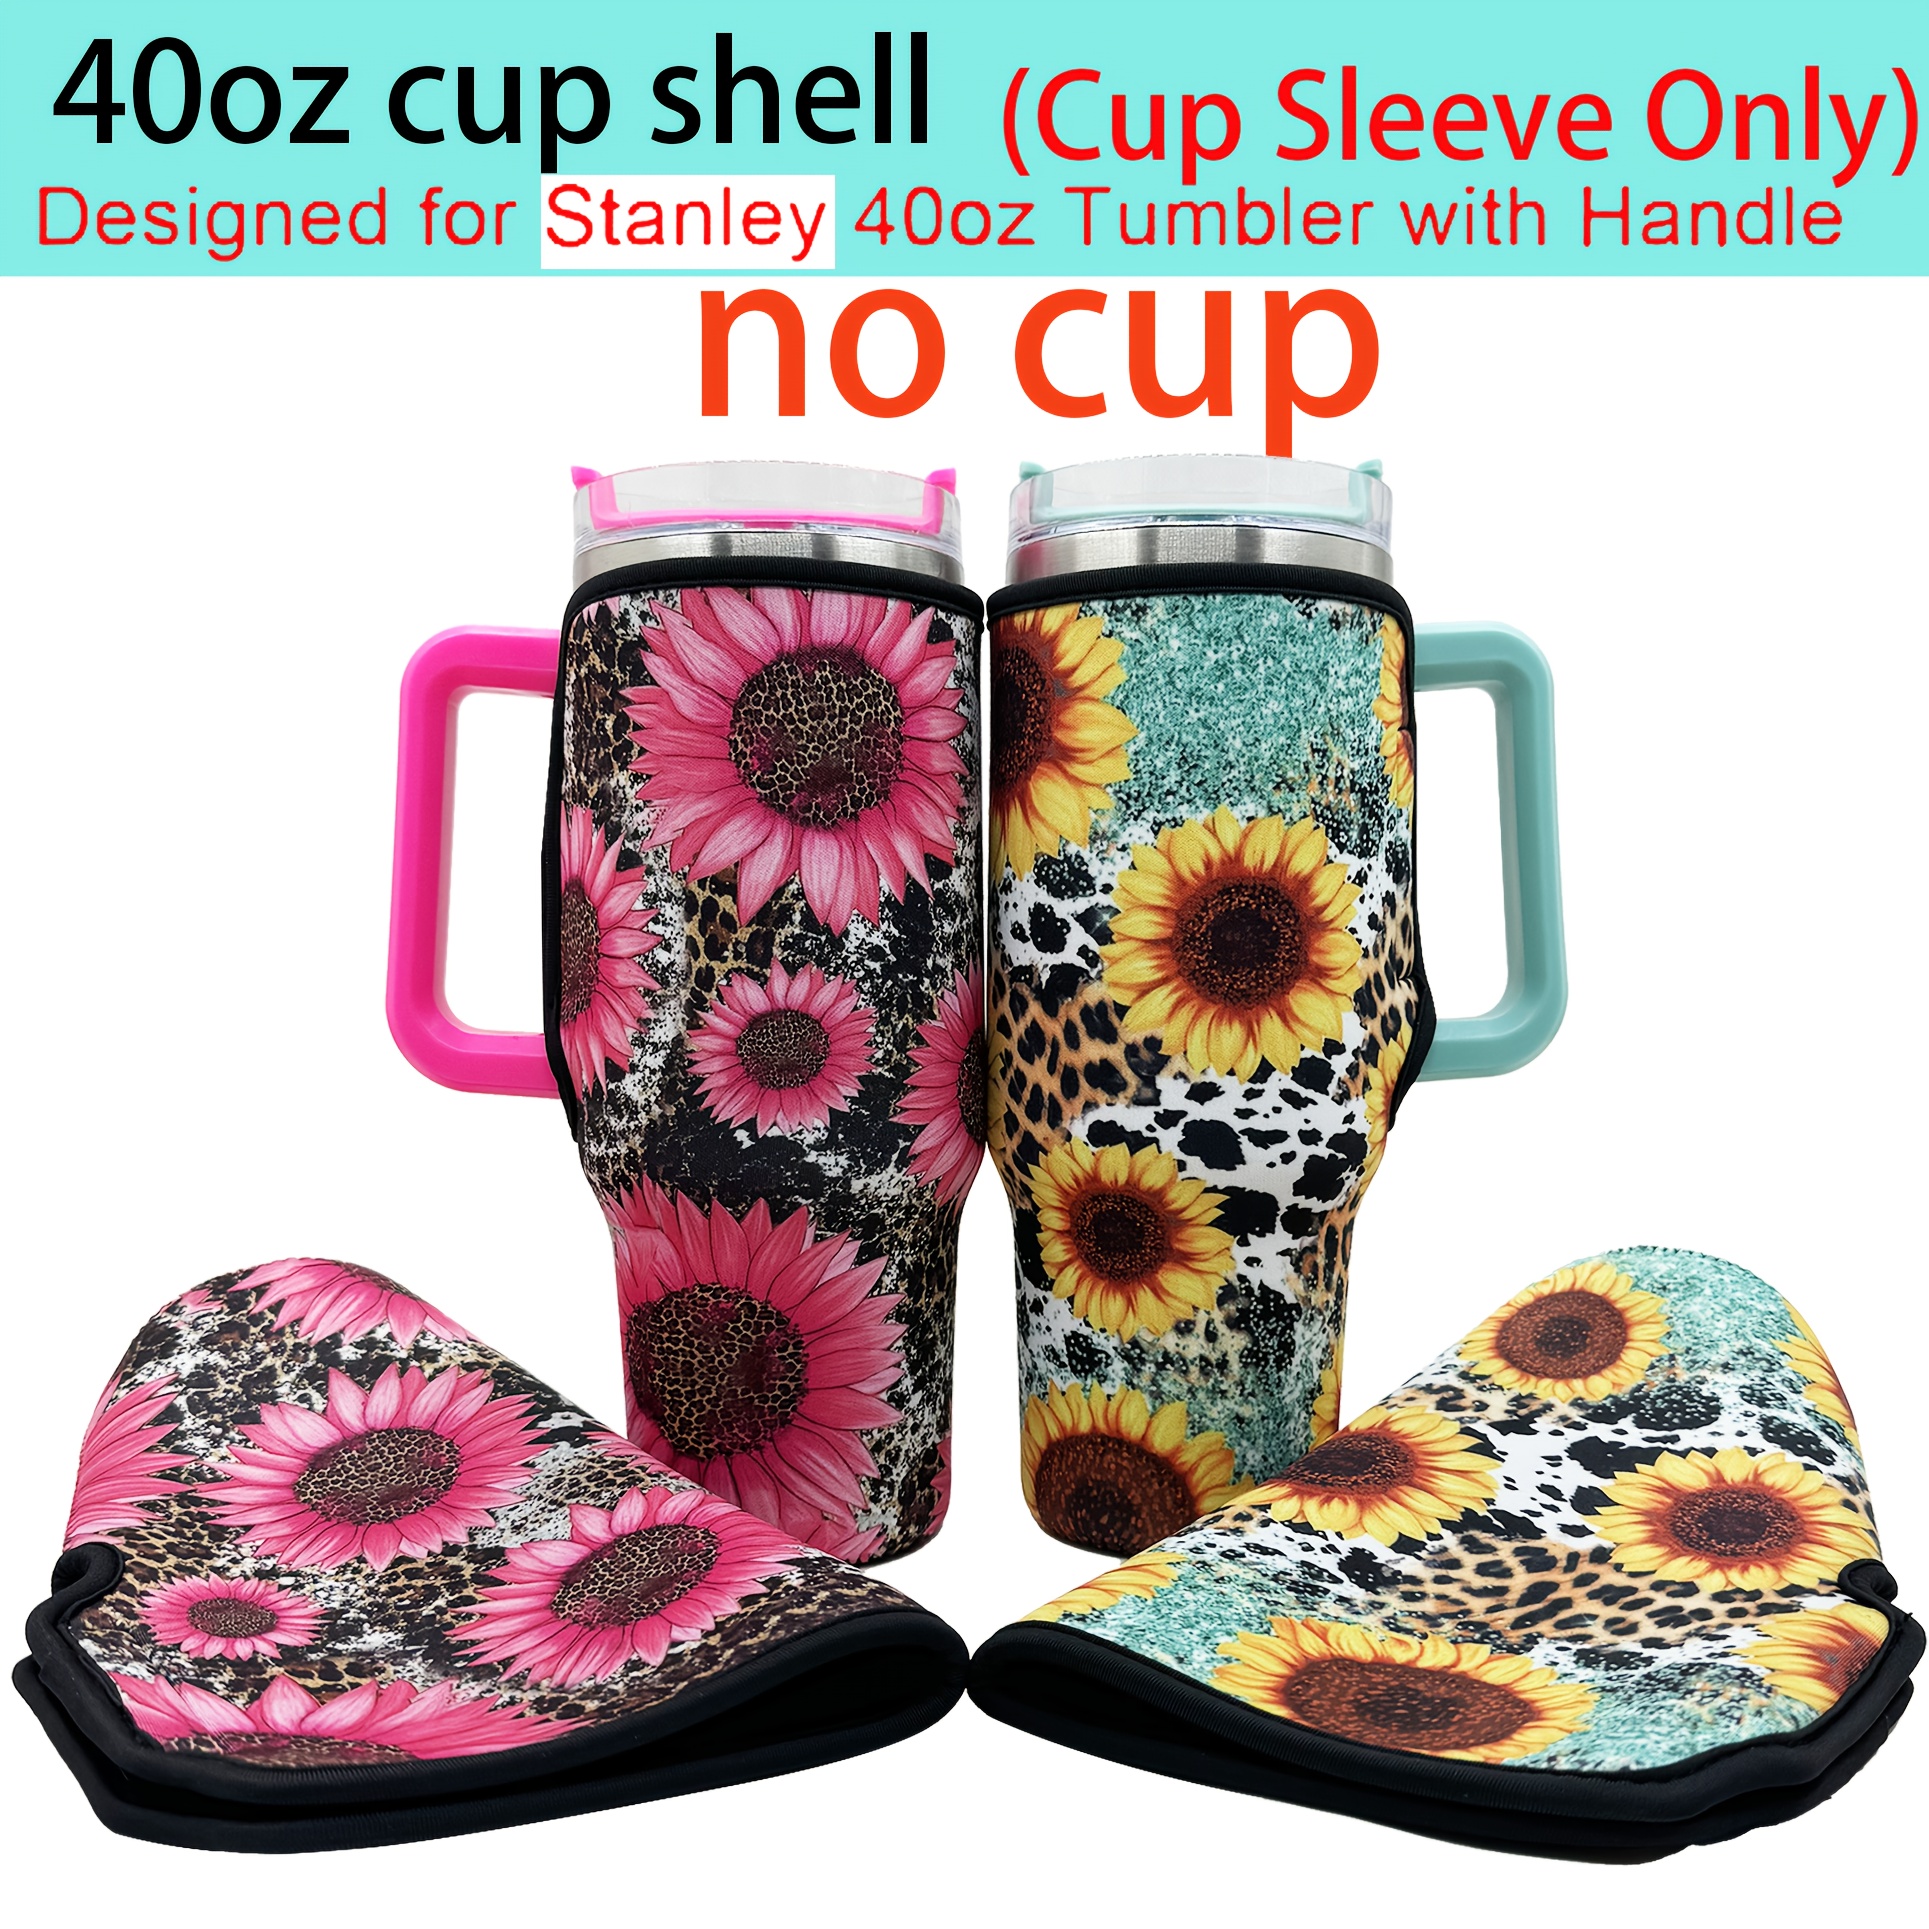 

1pc Sunflower Neoprene Cup Sleeve, Insulated Cold-resistant & Scratch-proof For 40oz Stanley Tumbler With Handle (sleeve Only)